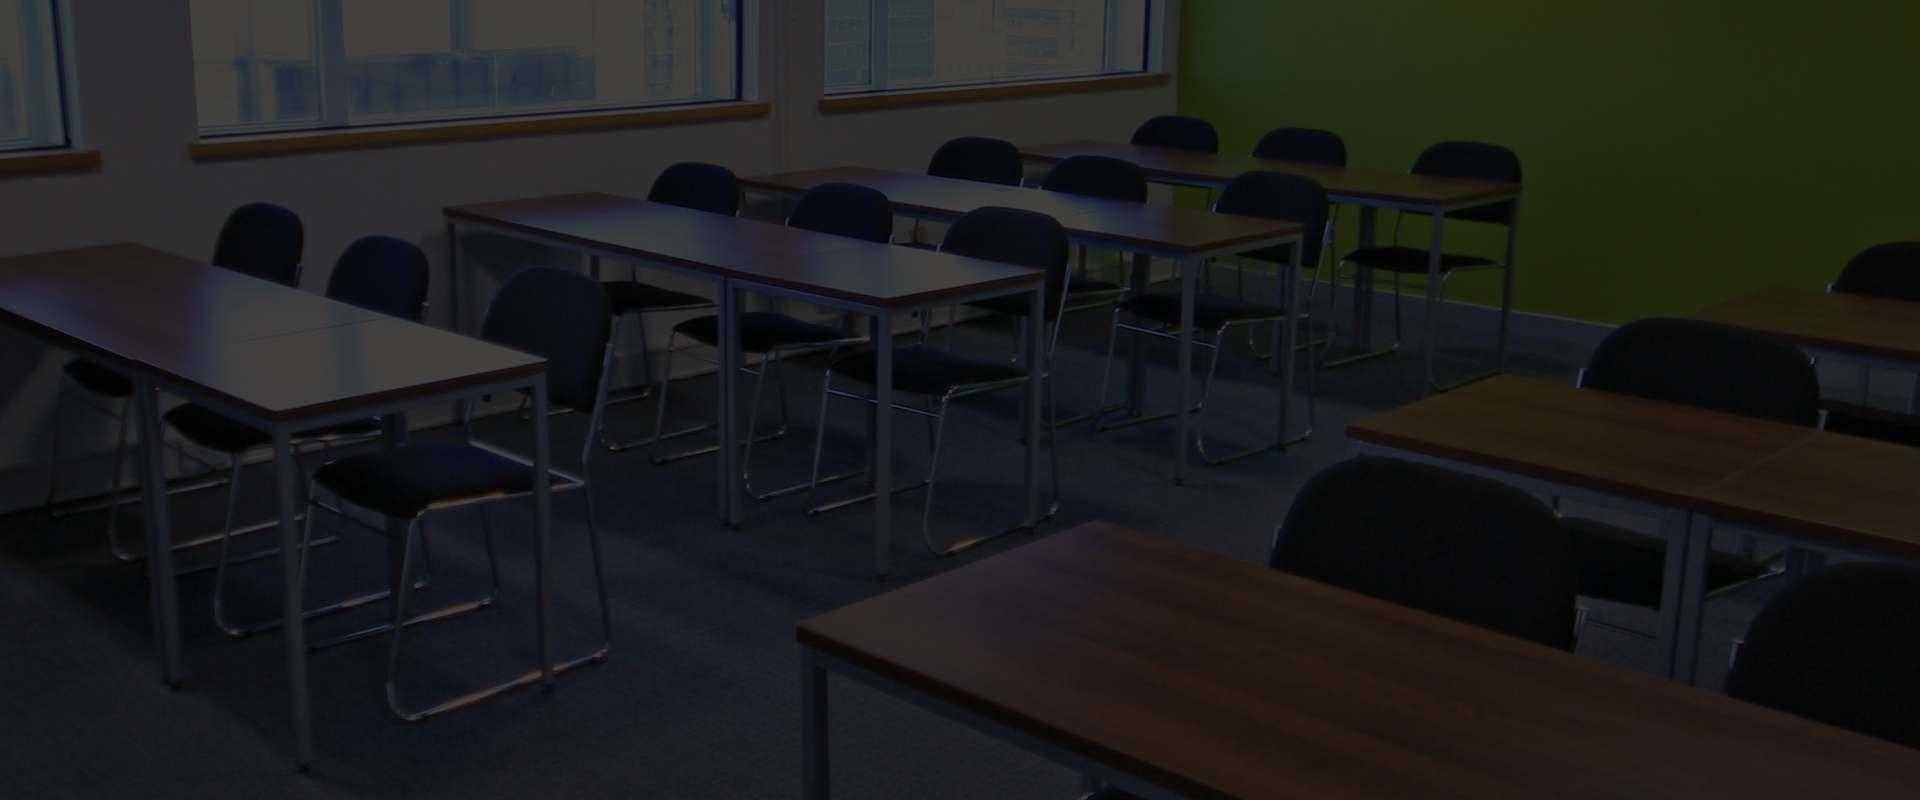 Training Room Hire Manchester